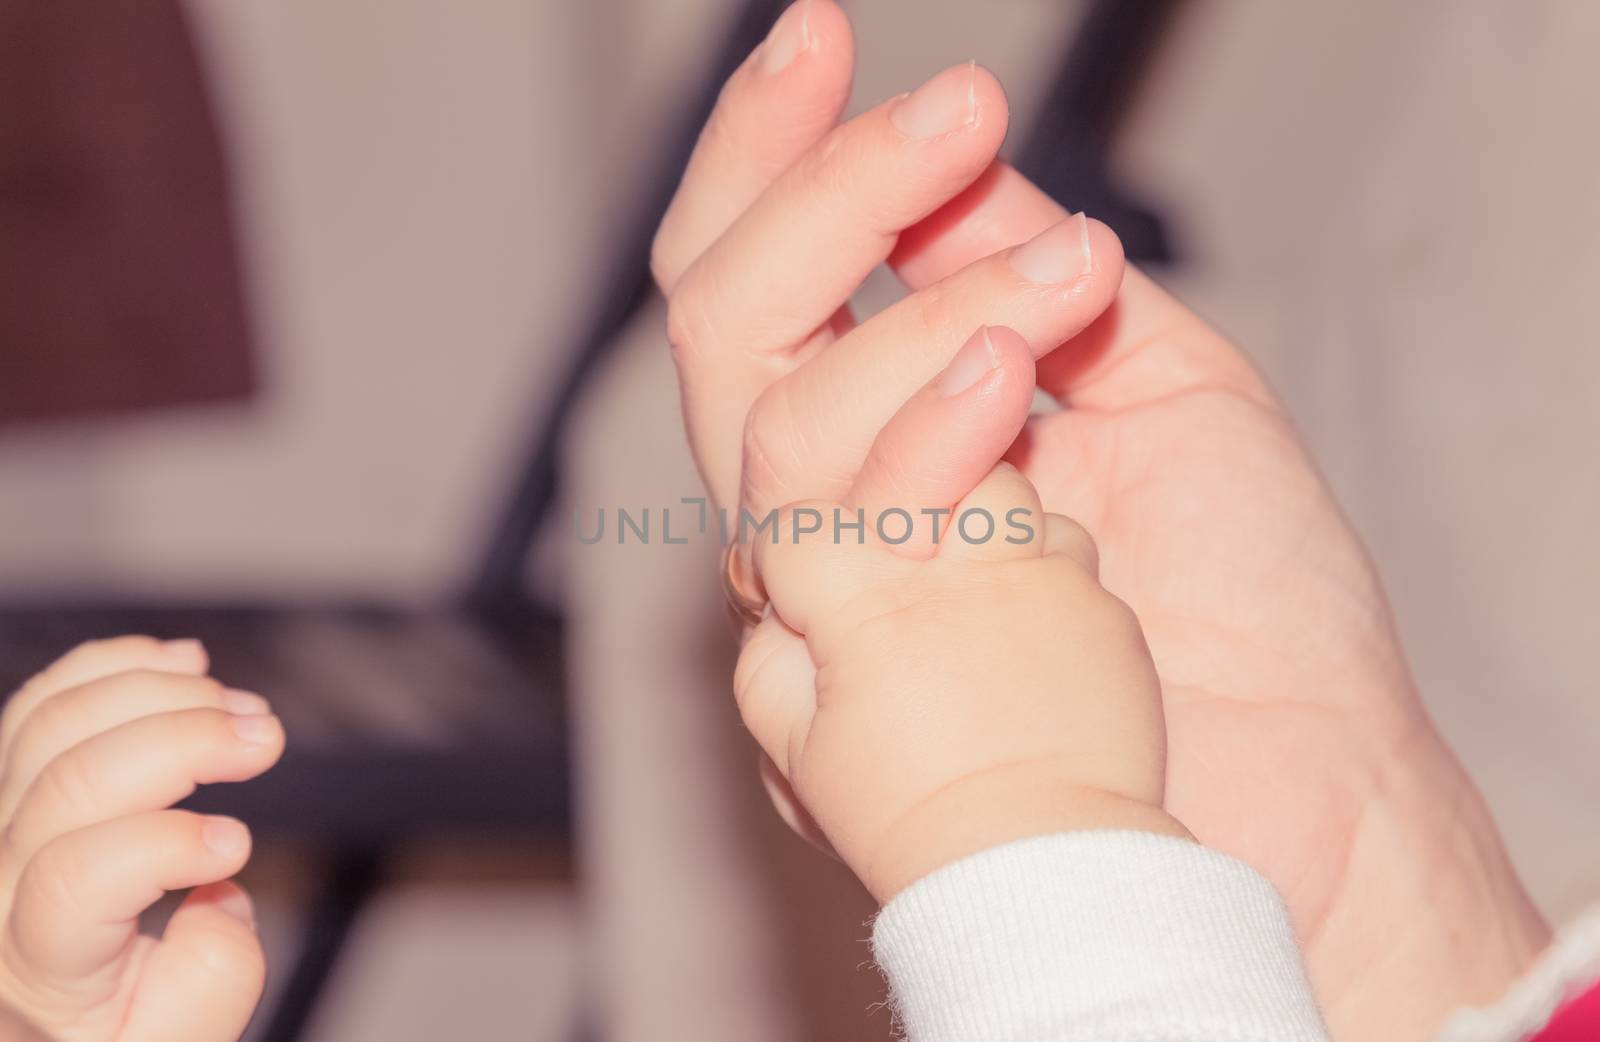 newborn baby hand holding adult finger, maternity concept, love image beautiful family